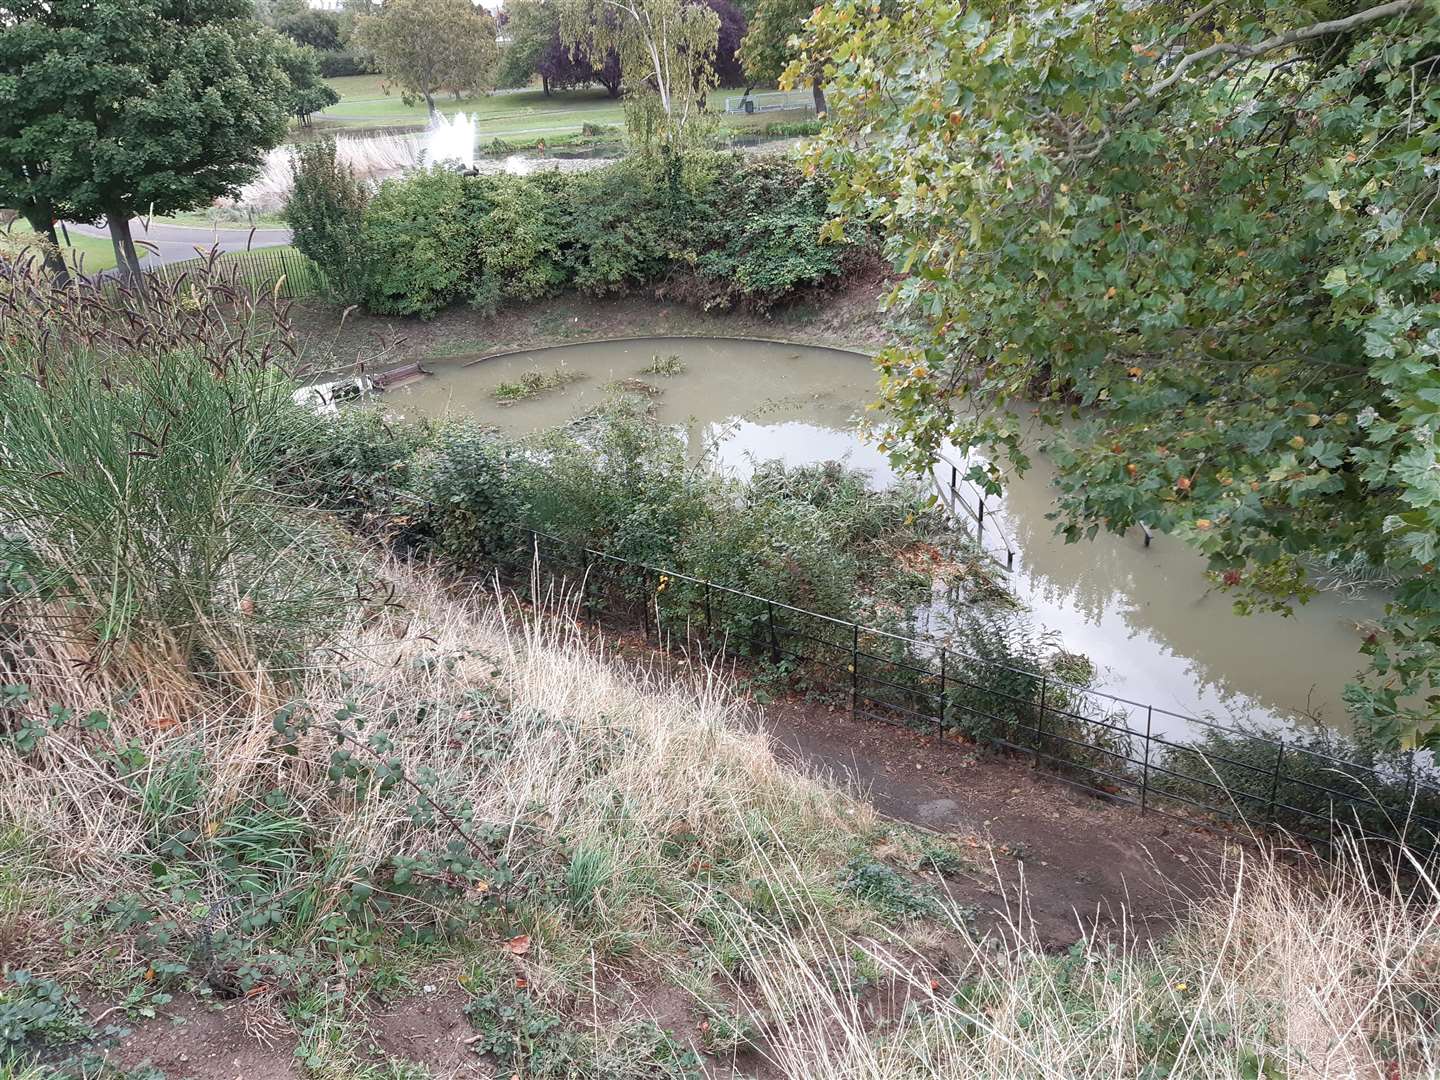 A section of the promenade in Gravesend Riversde known as 'The Dell' has become submerged under water. (18083507)